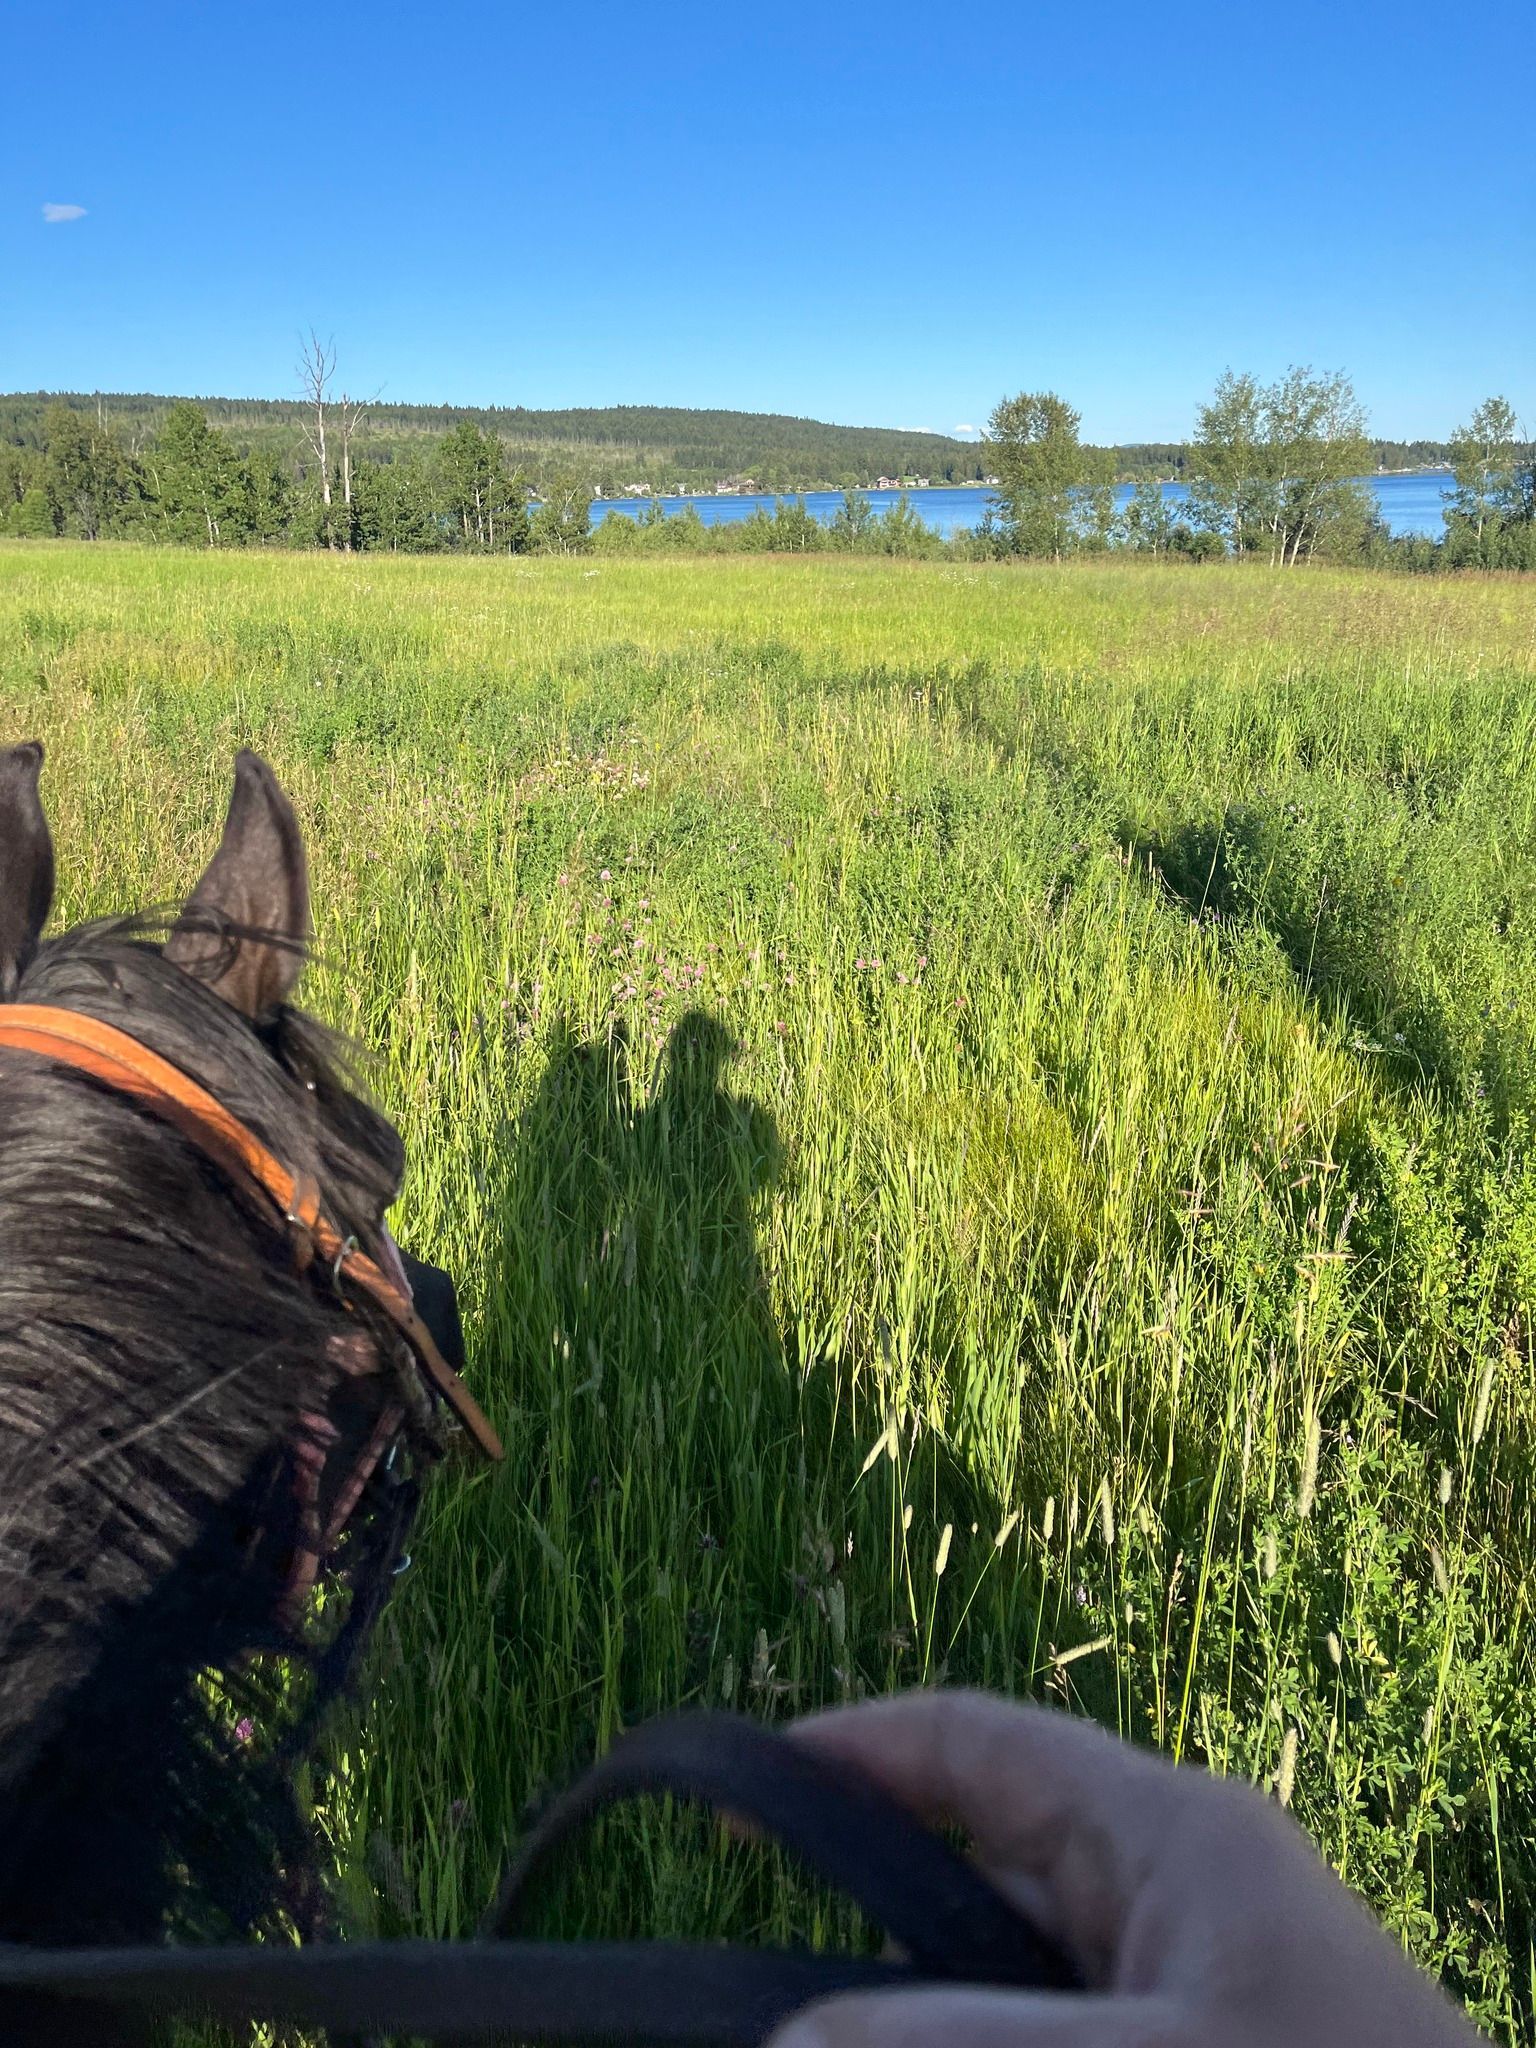 A person is riding a horse through a grassy field.